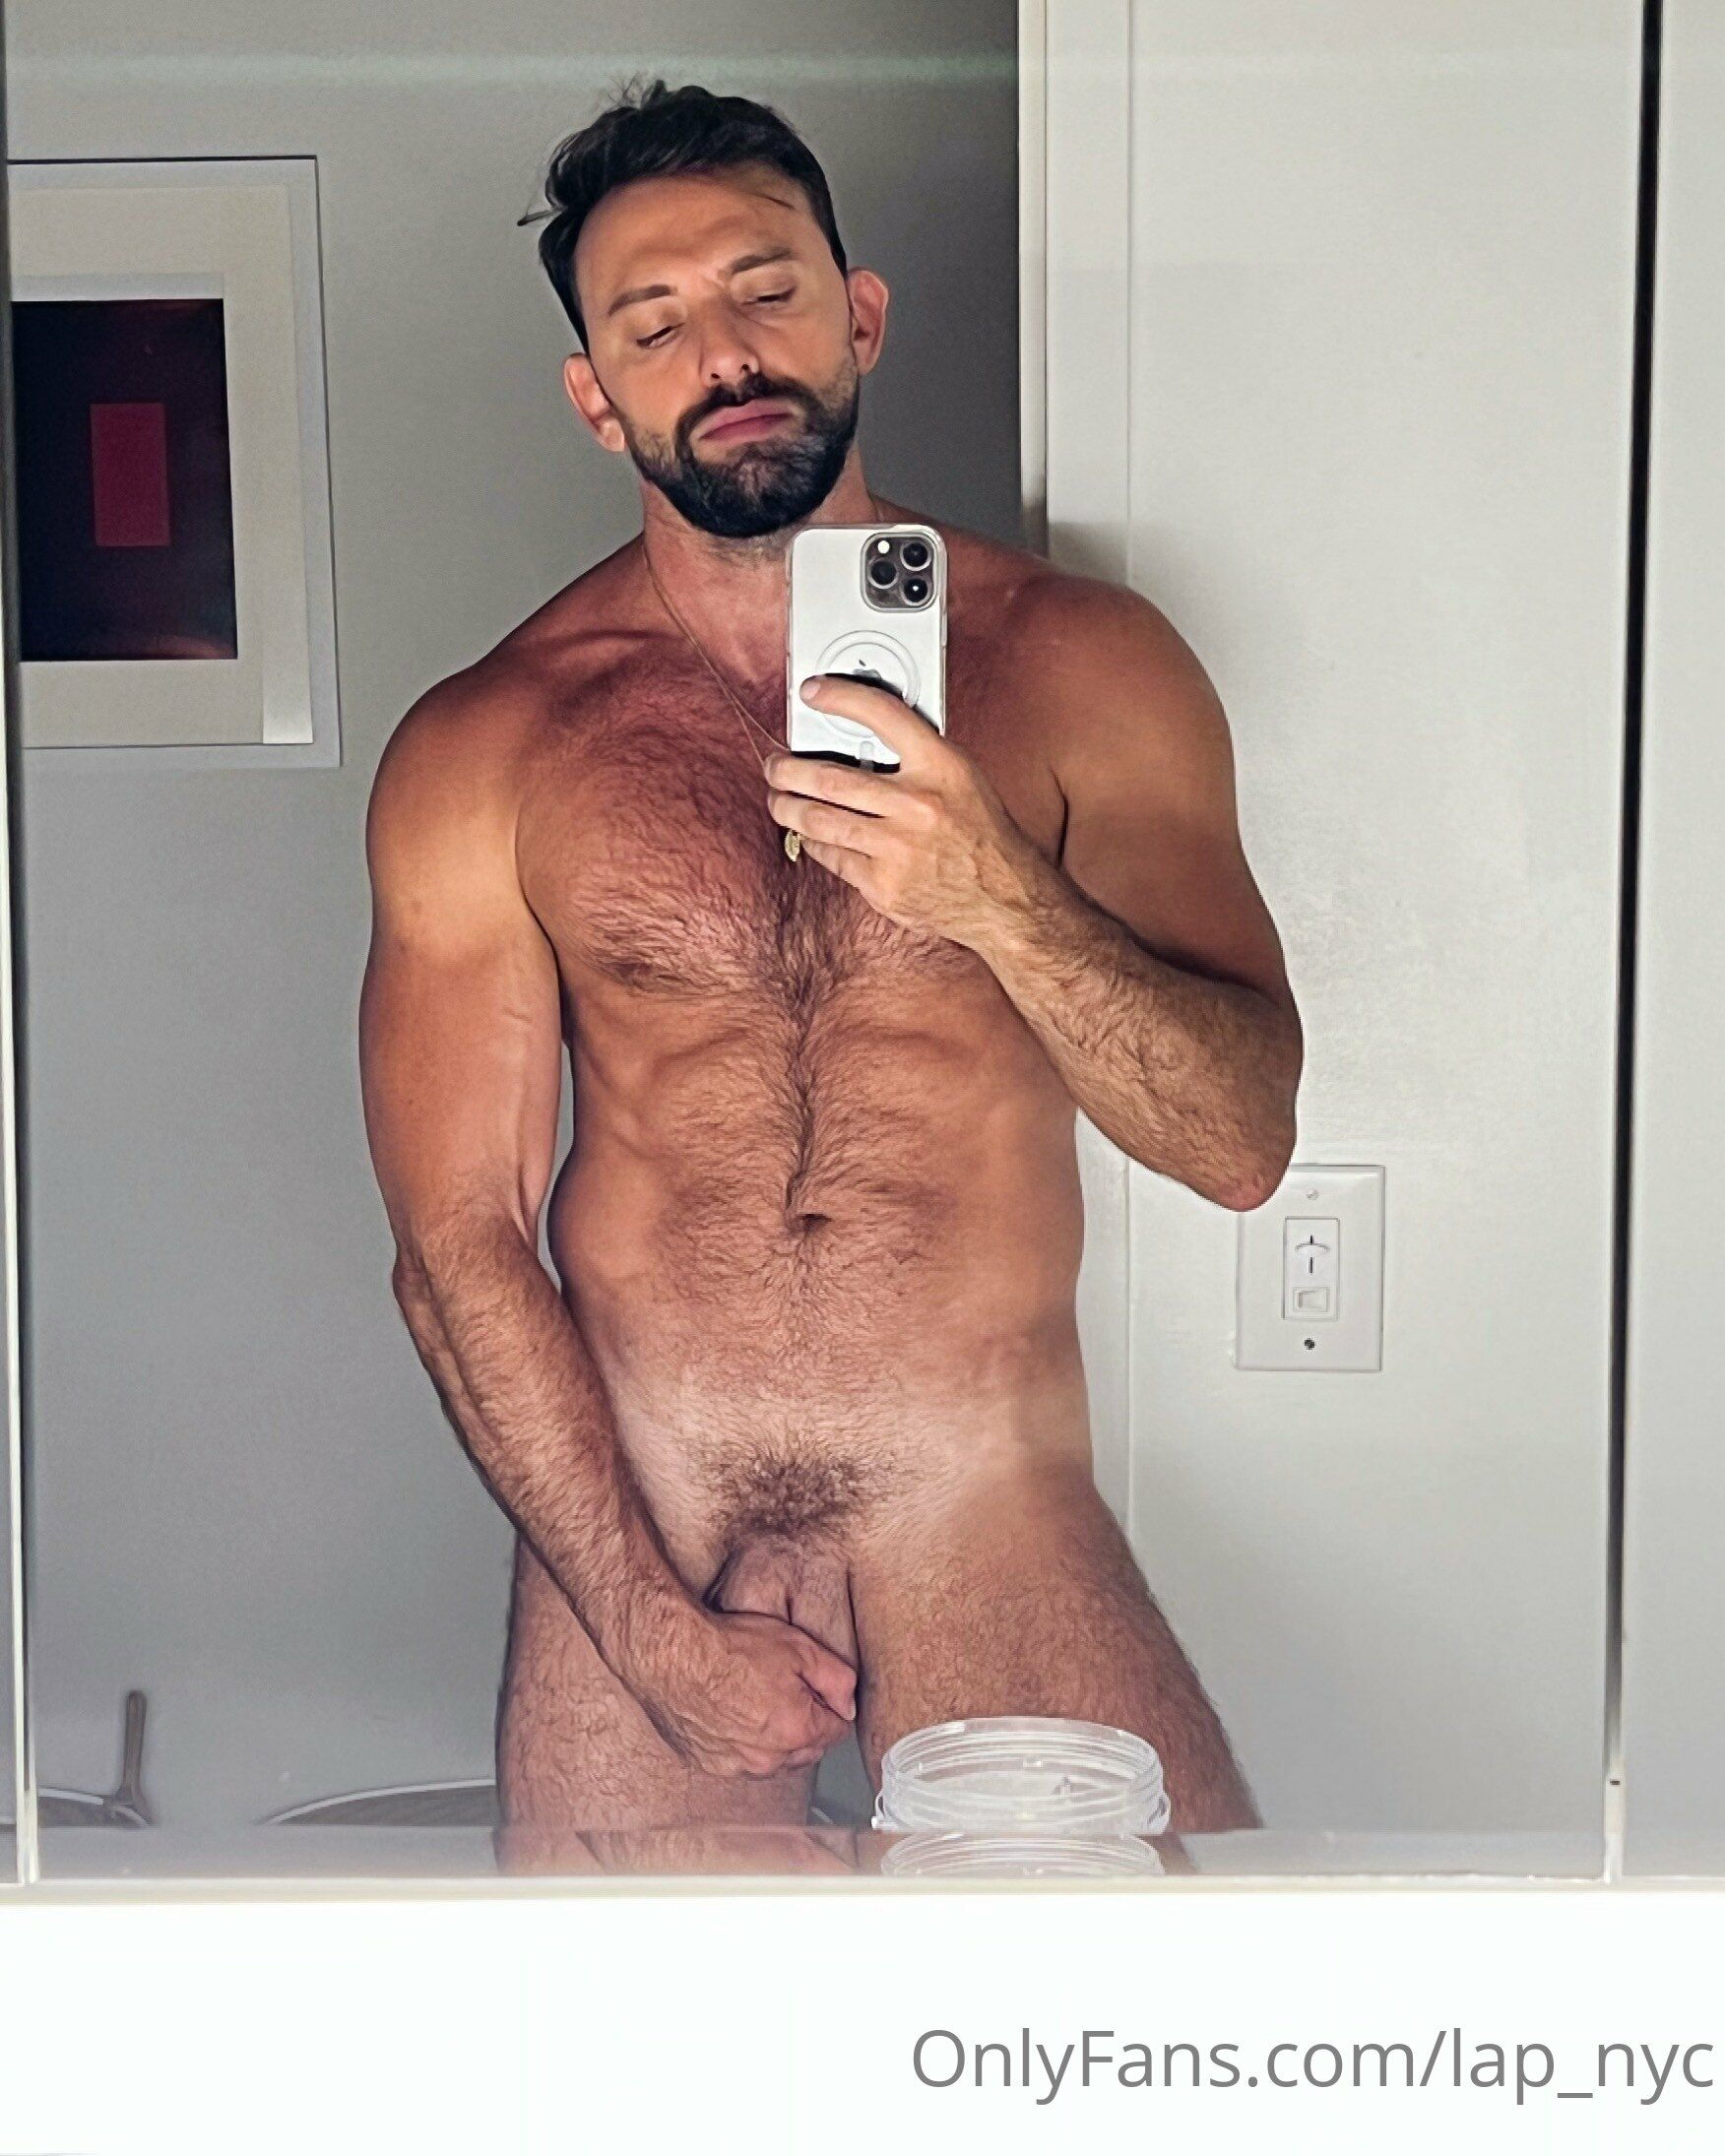 Lap nyc onlyfans